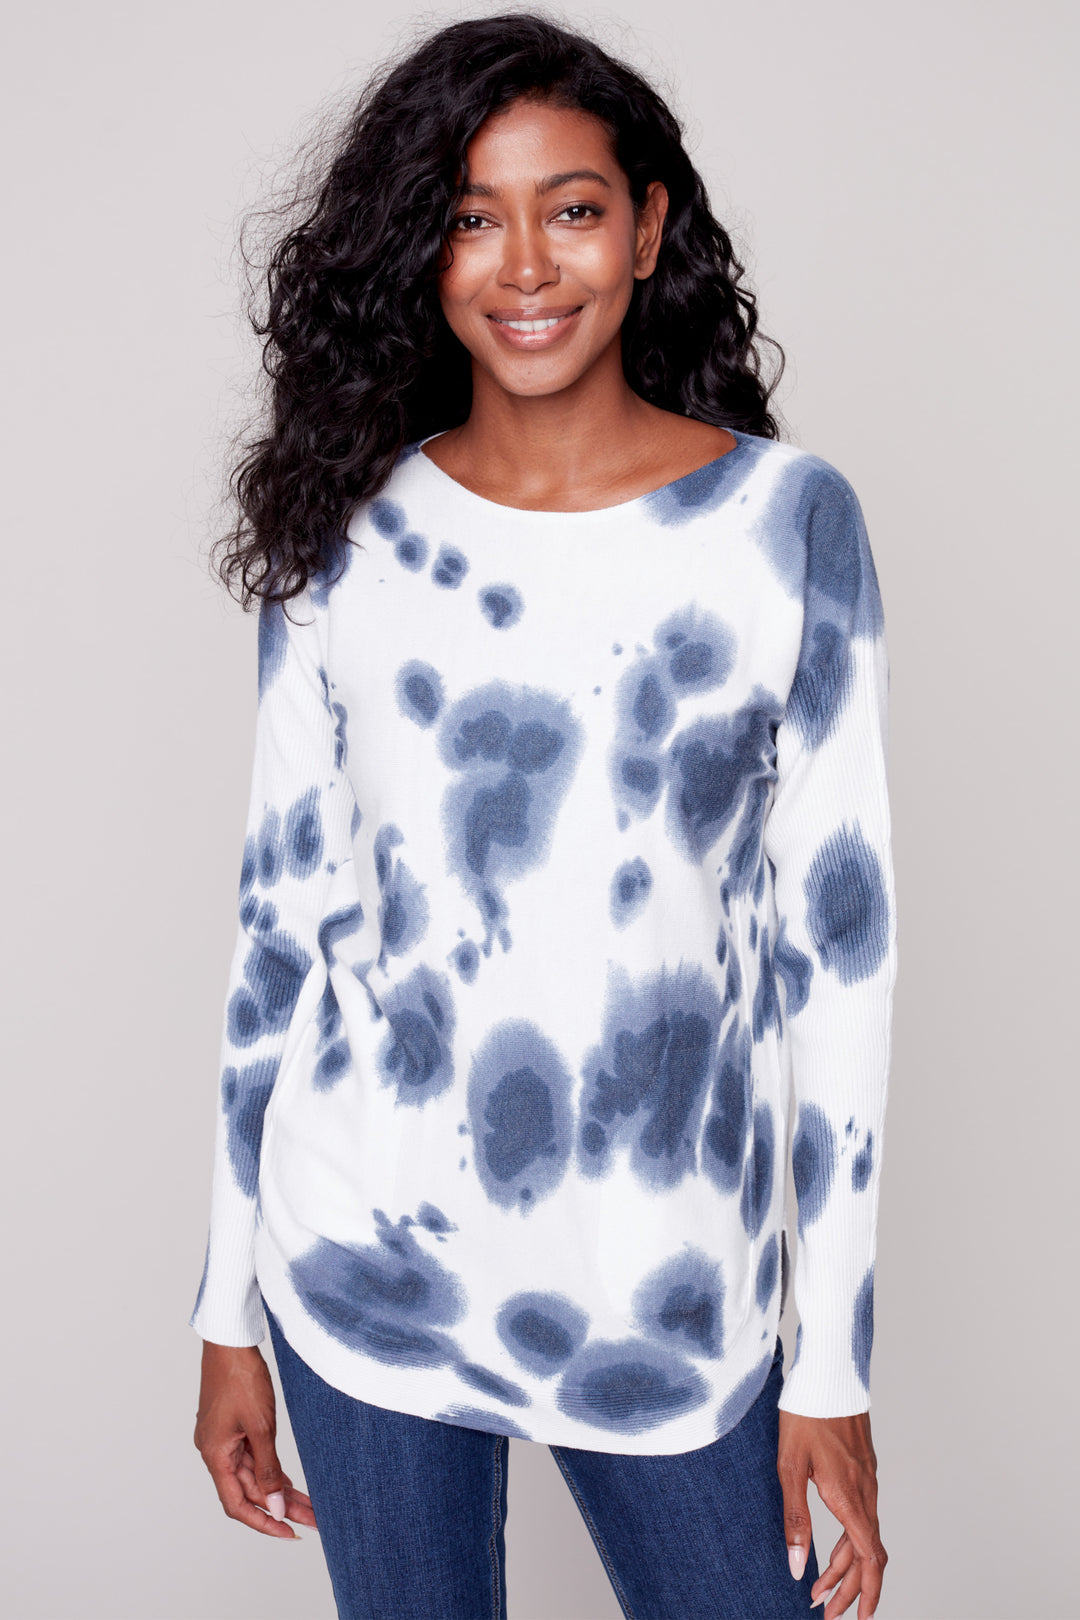 Feel spotted and special in this Tiedye Spots Long Sleeve Top! With its printed cuff, lace-up detail, and pockets — you'll be stylishly rocking your look at every corner. Styled with a rounded hem, this fun spots long sleeve light top will keep you looking sweet and sleek!